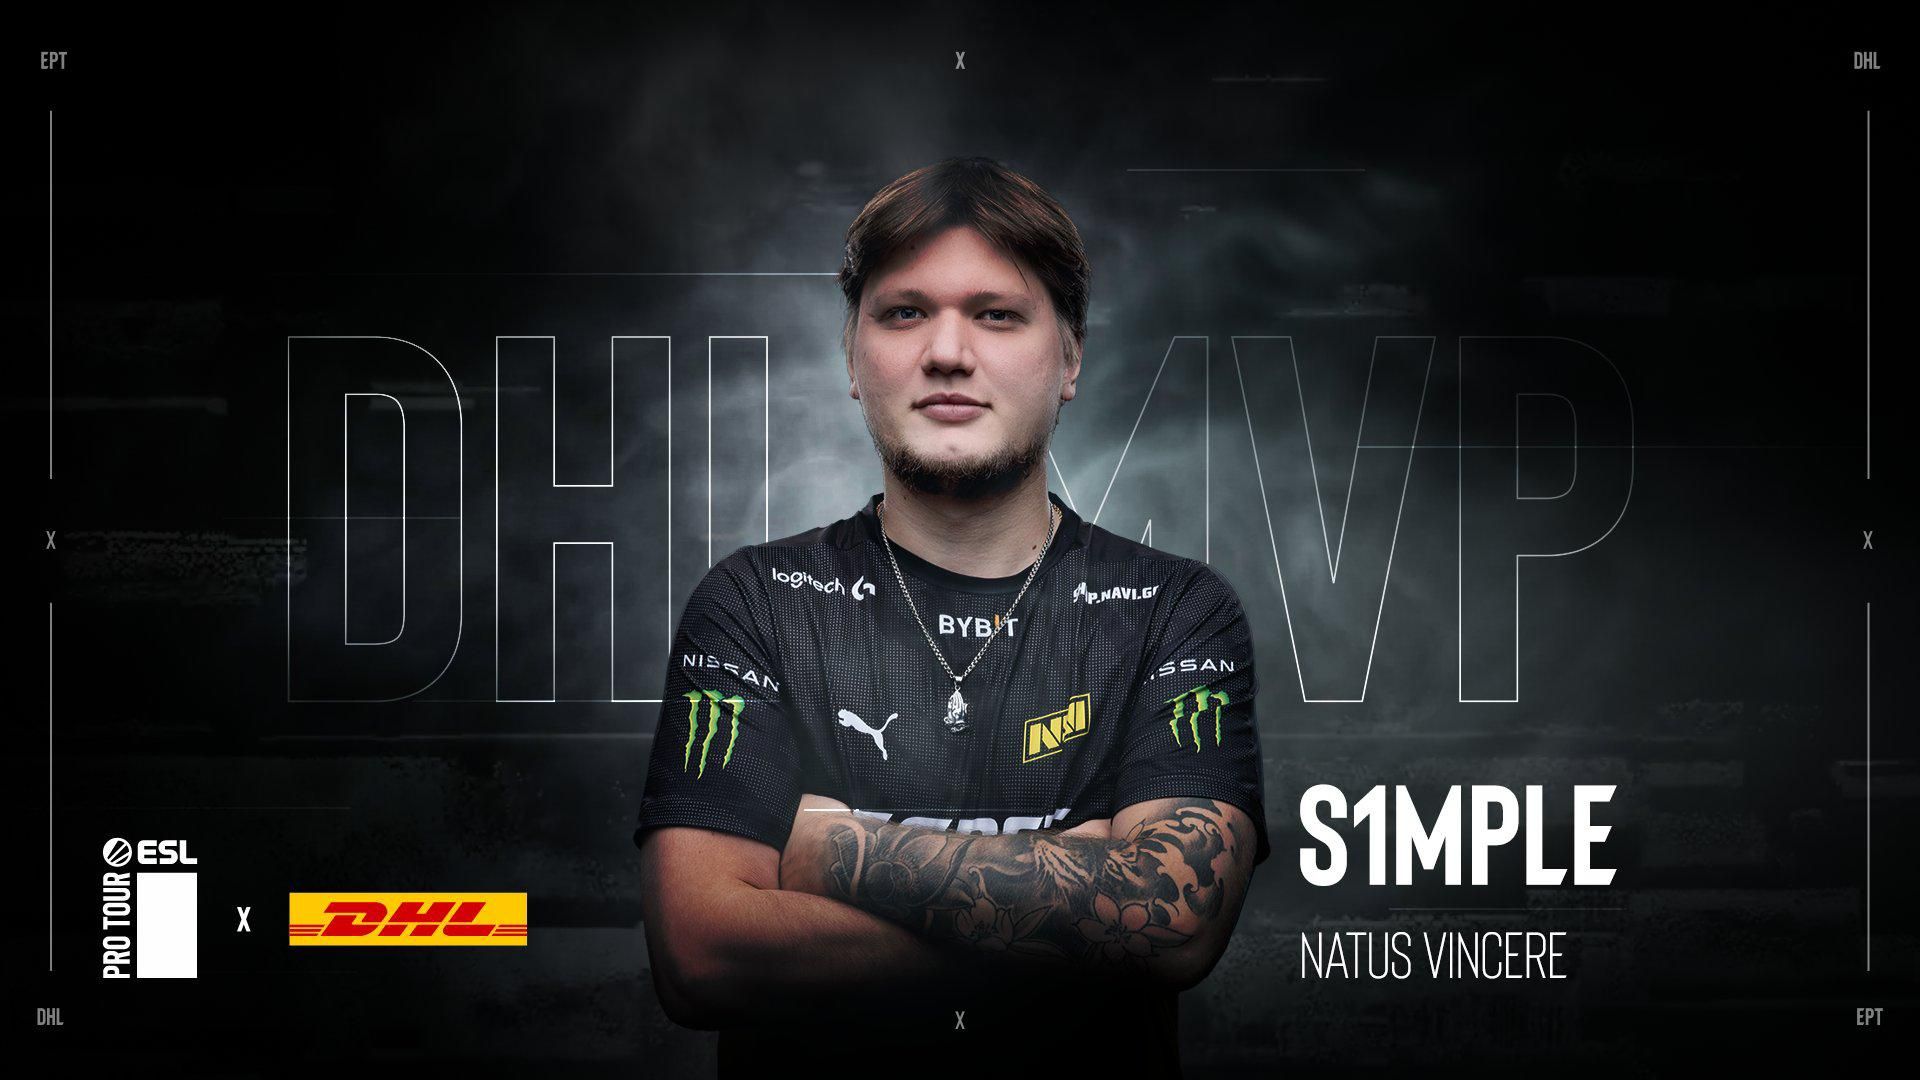 S1mple steam official фото 24